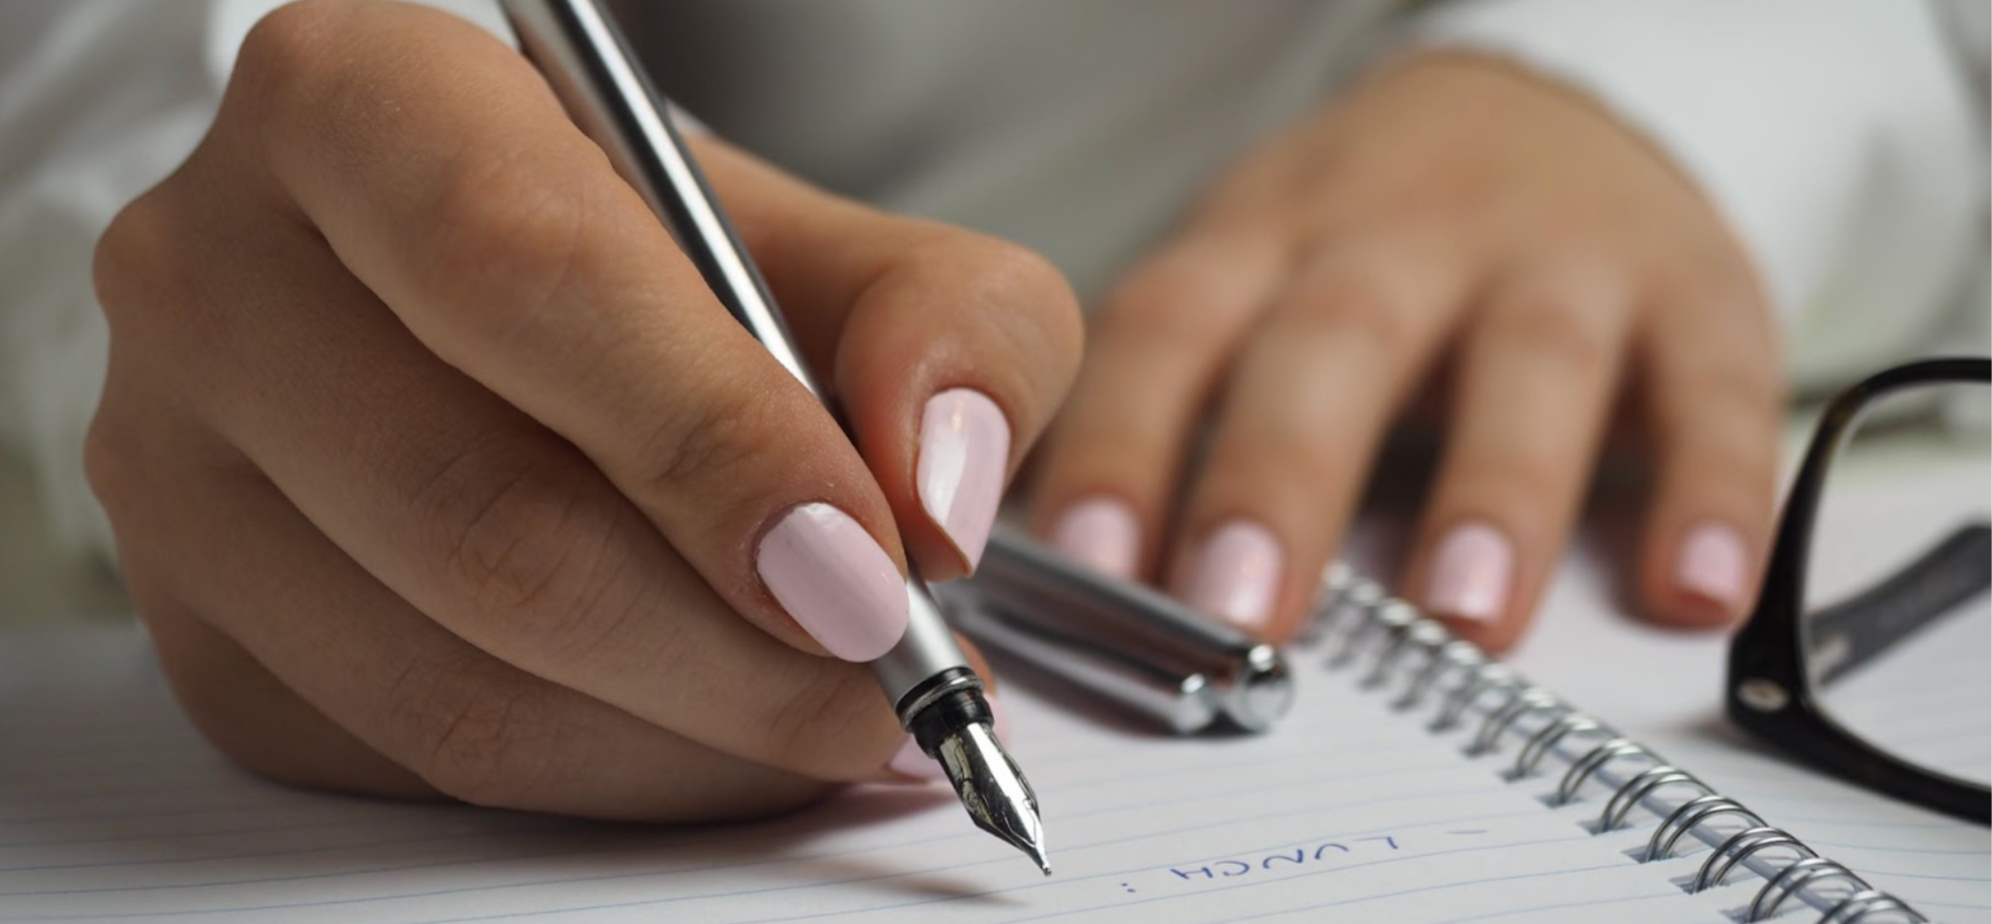 Close-up of a woman writing in a journal using a cartridge pen